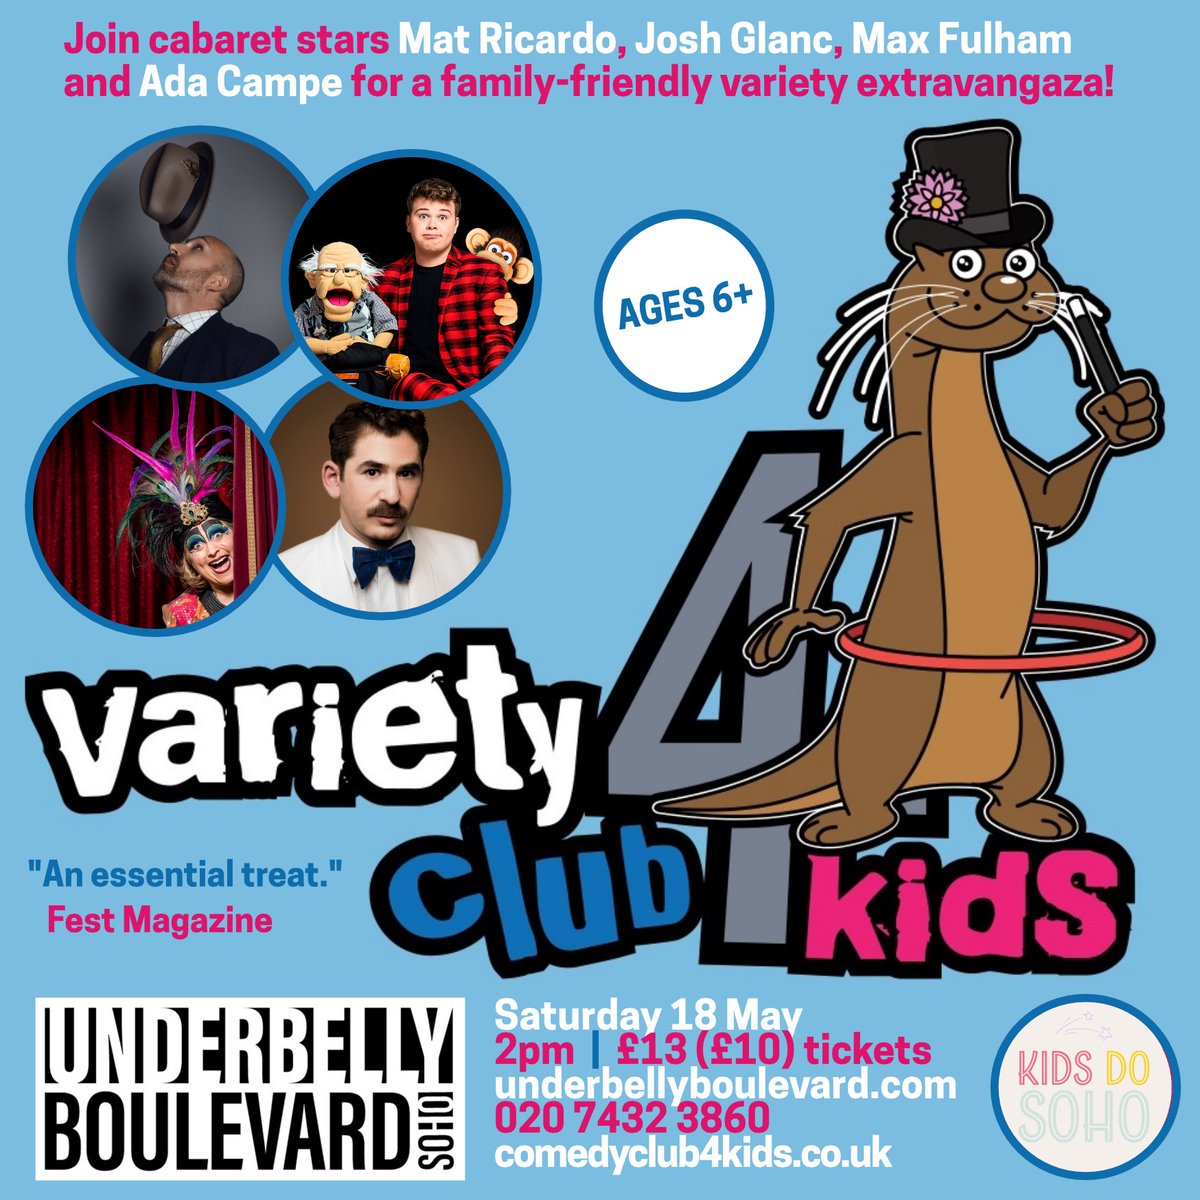 London! KIDS! Join us at @ubsoho on Saturday 18th May for, as @MatRicardo says, cabaret EXCELLENCE with @JoshGlanc, @MaxFulham and @AdaCampe!